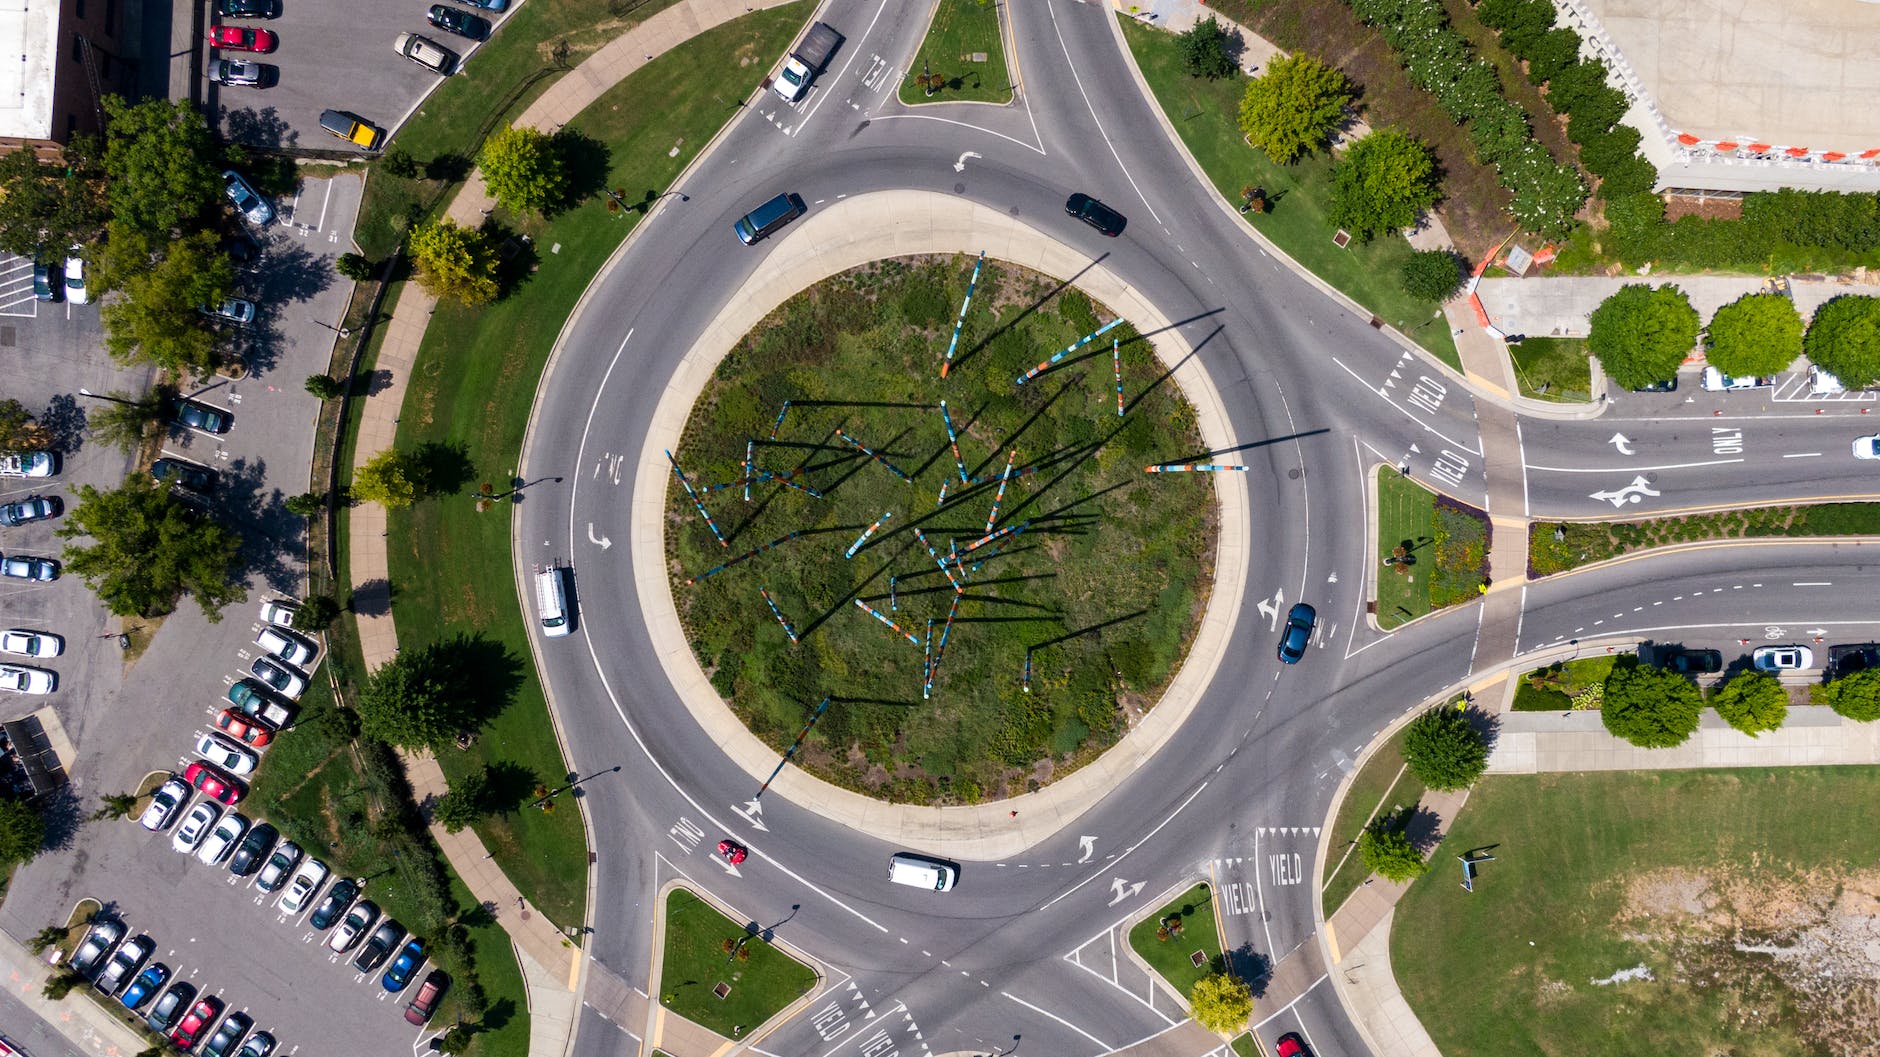 vehicles passing on a roundabout